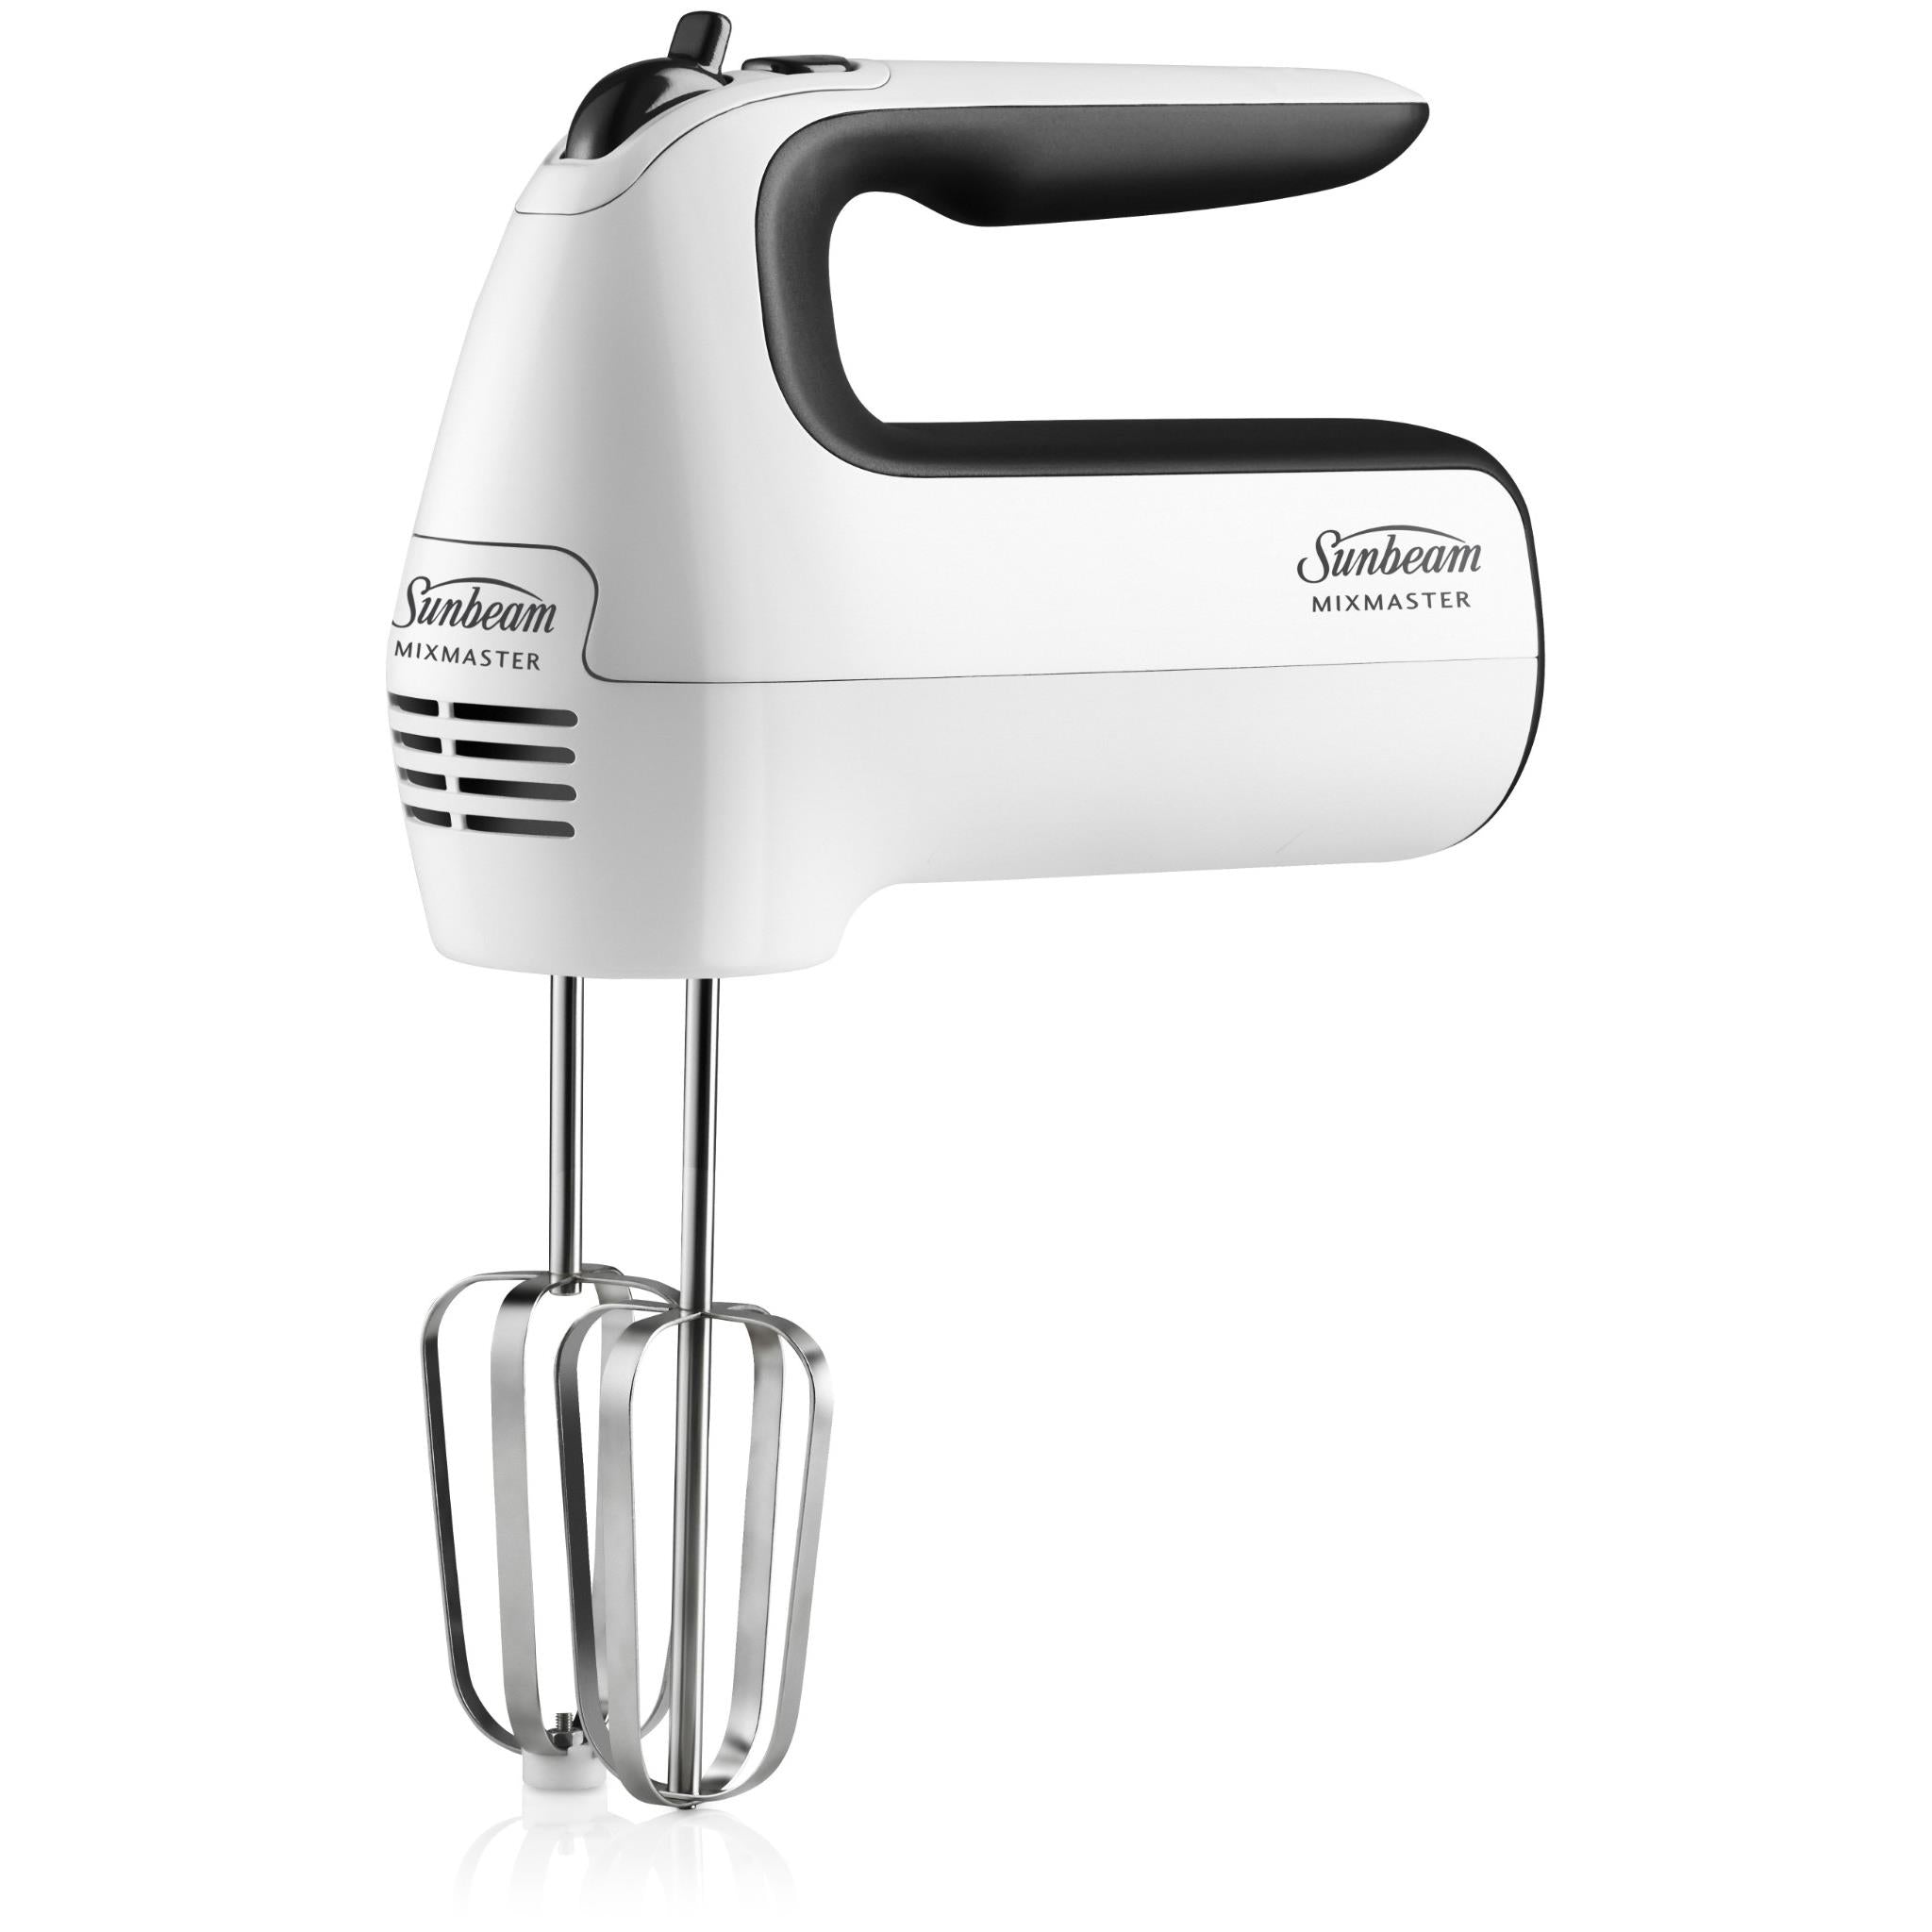 Sunbeam Mixmaster w/ 2 bowls, Beaters and dough hooks - household